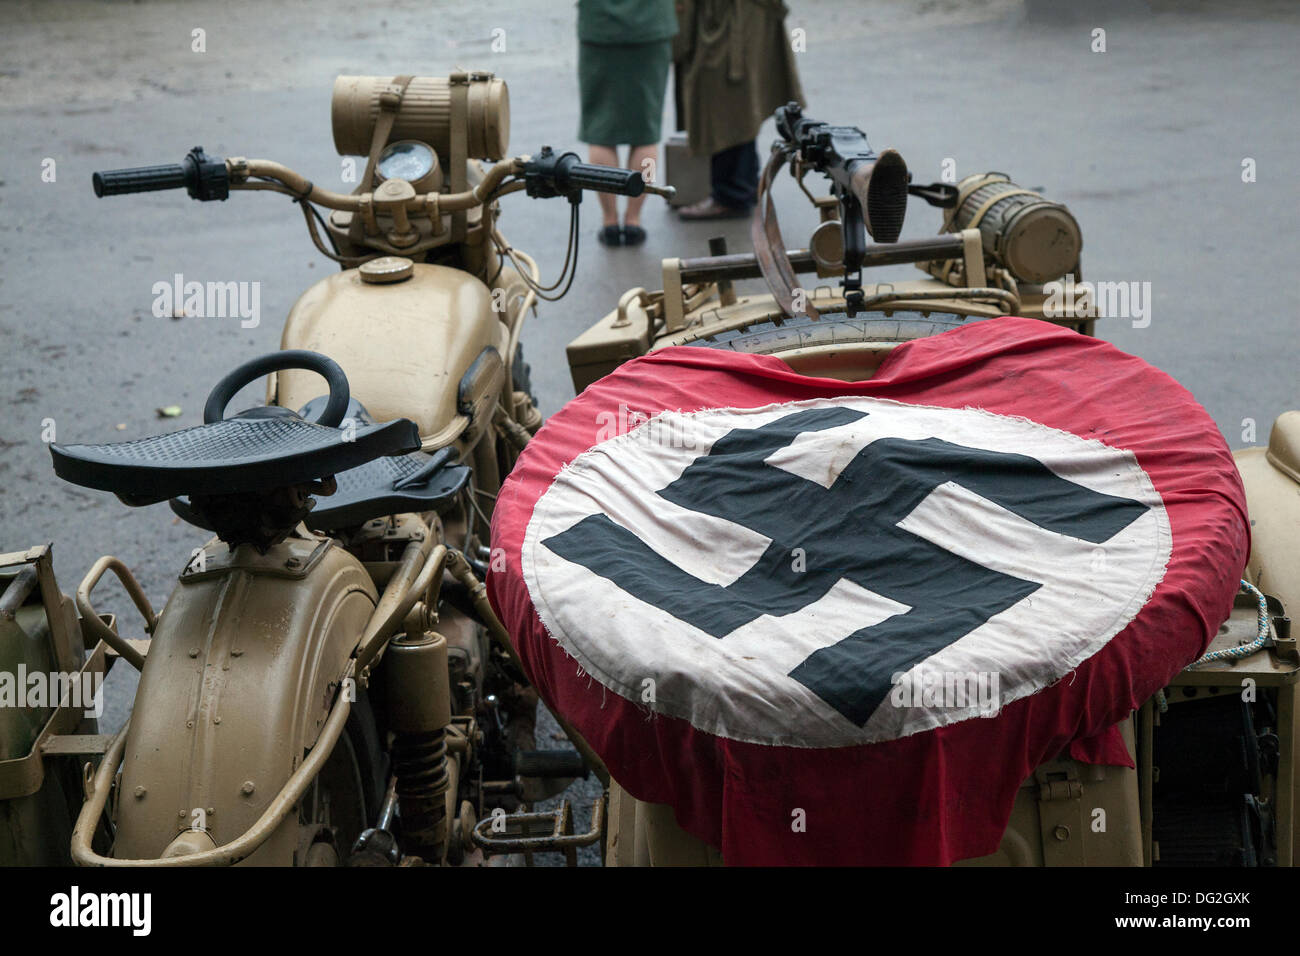 German motorbike and side-car, &  Nazi swastika flag at the ‘Railway in Wartime’  North Yorks Moors Railway (NYMR) event 2013.   Levisham Station, was decorated with period posters, & French signs  during the (NYMR) ‘Wartime Weekend’ to become  ‘Le Visham’ in northern France. The gathering, a recreation of a French village occupied by World War Two, World War II, Second World War,  WWII, WW2 German troops. The swastika is an ancient symbol that was in use in many different cultures for at least 5,000 years before Adolf Hitler adopted the flag Stock Photo